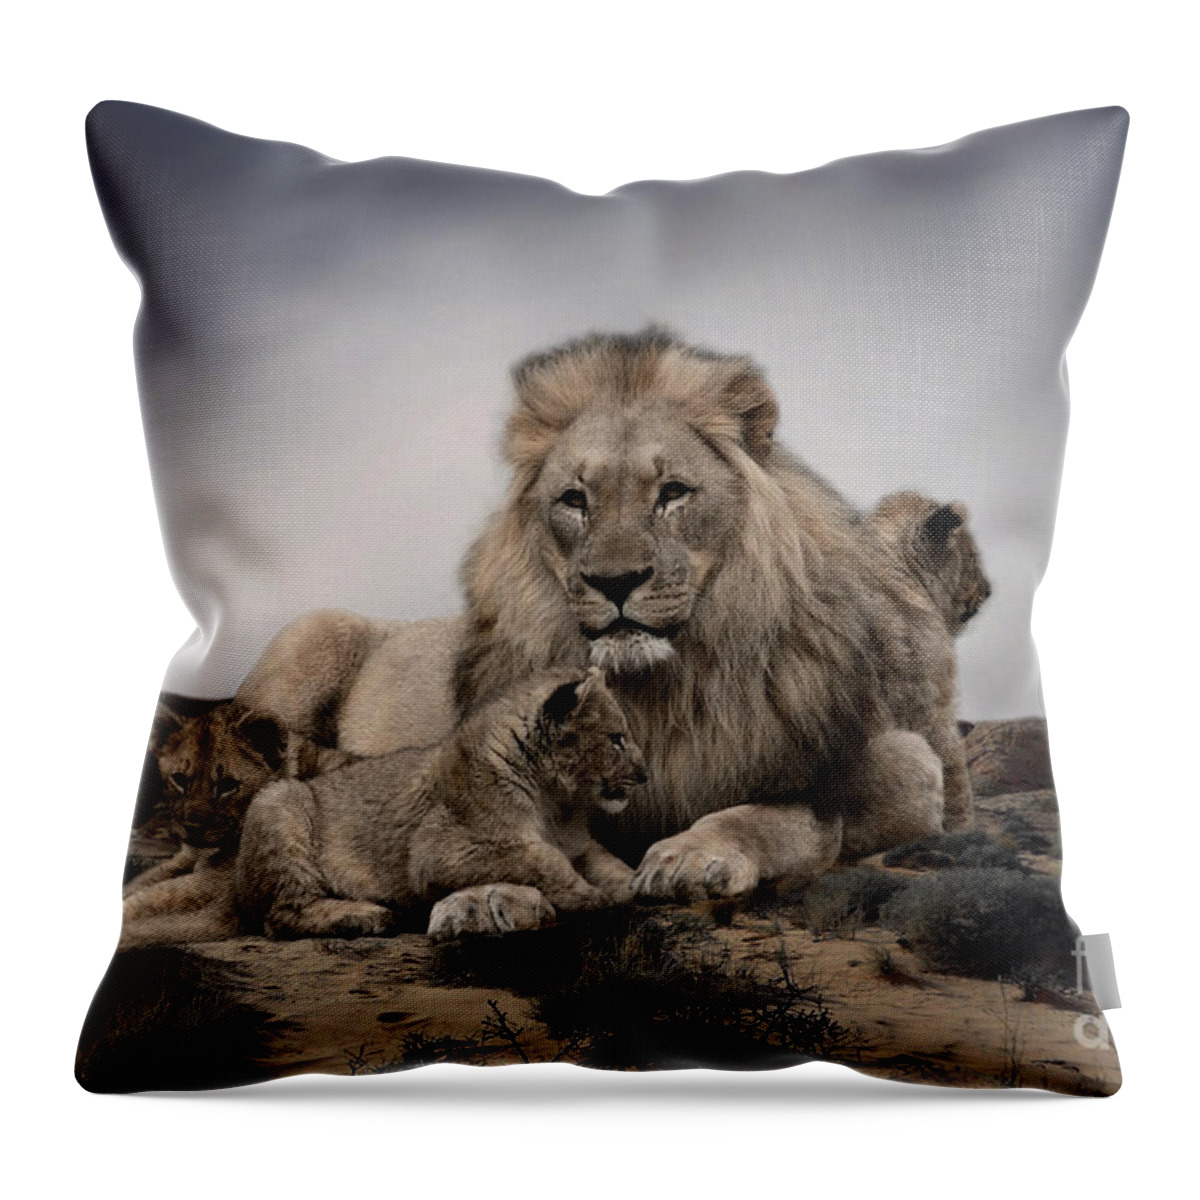 Lions Throw Pillow featuring the photograph The Lions by Christine Sponchia